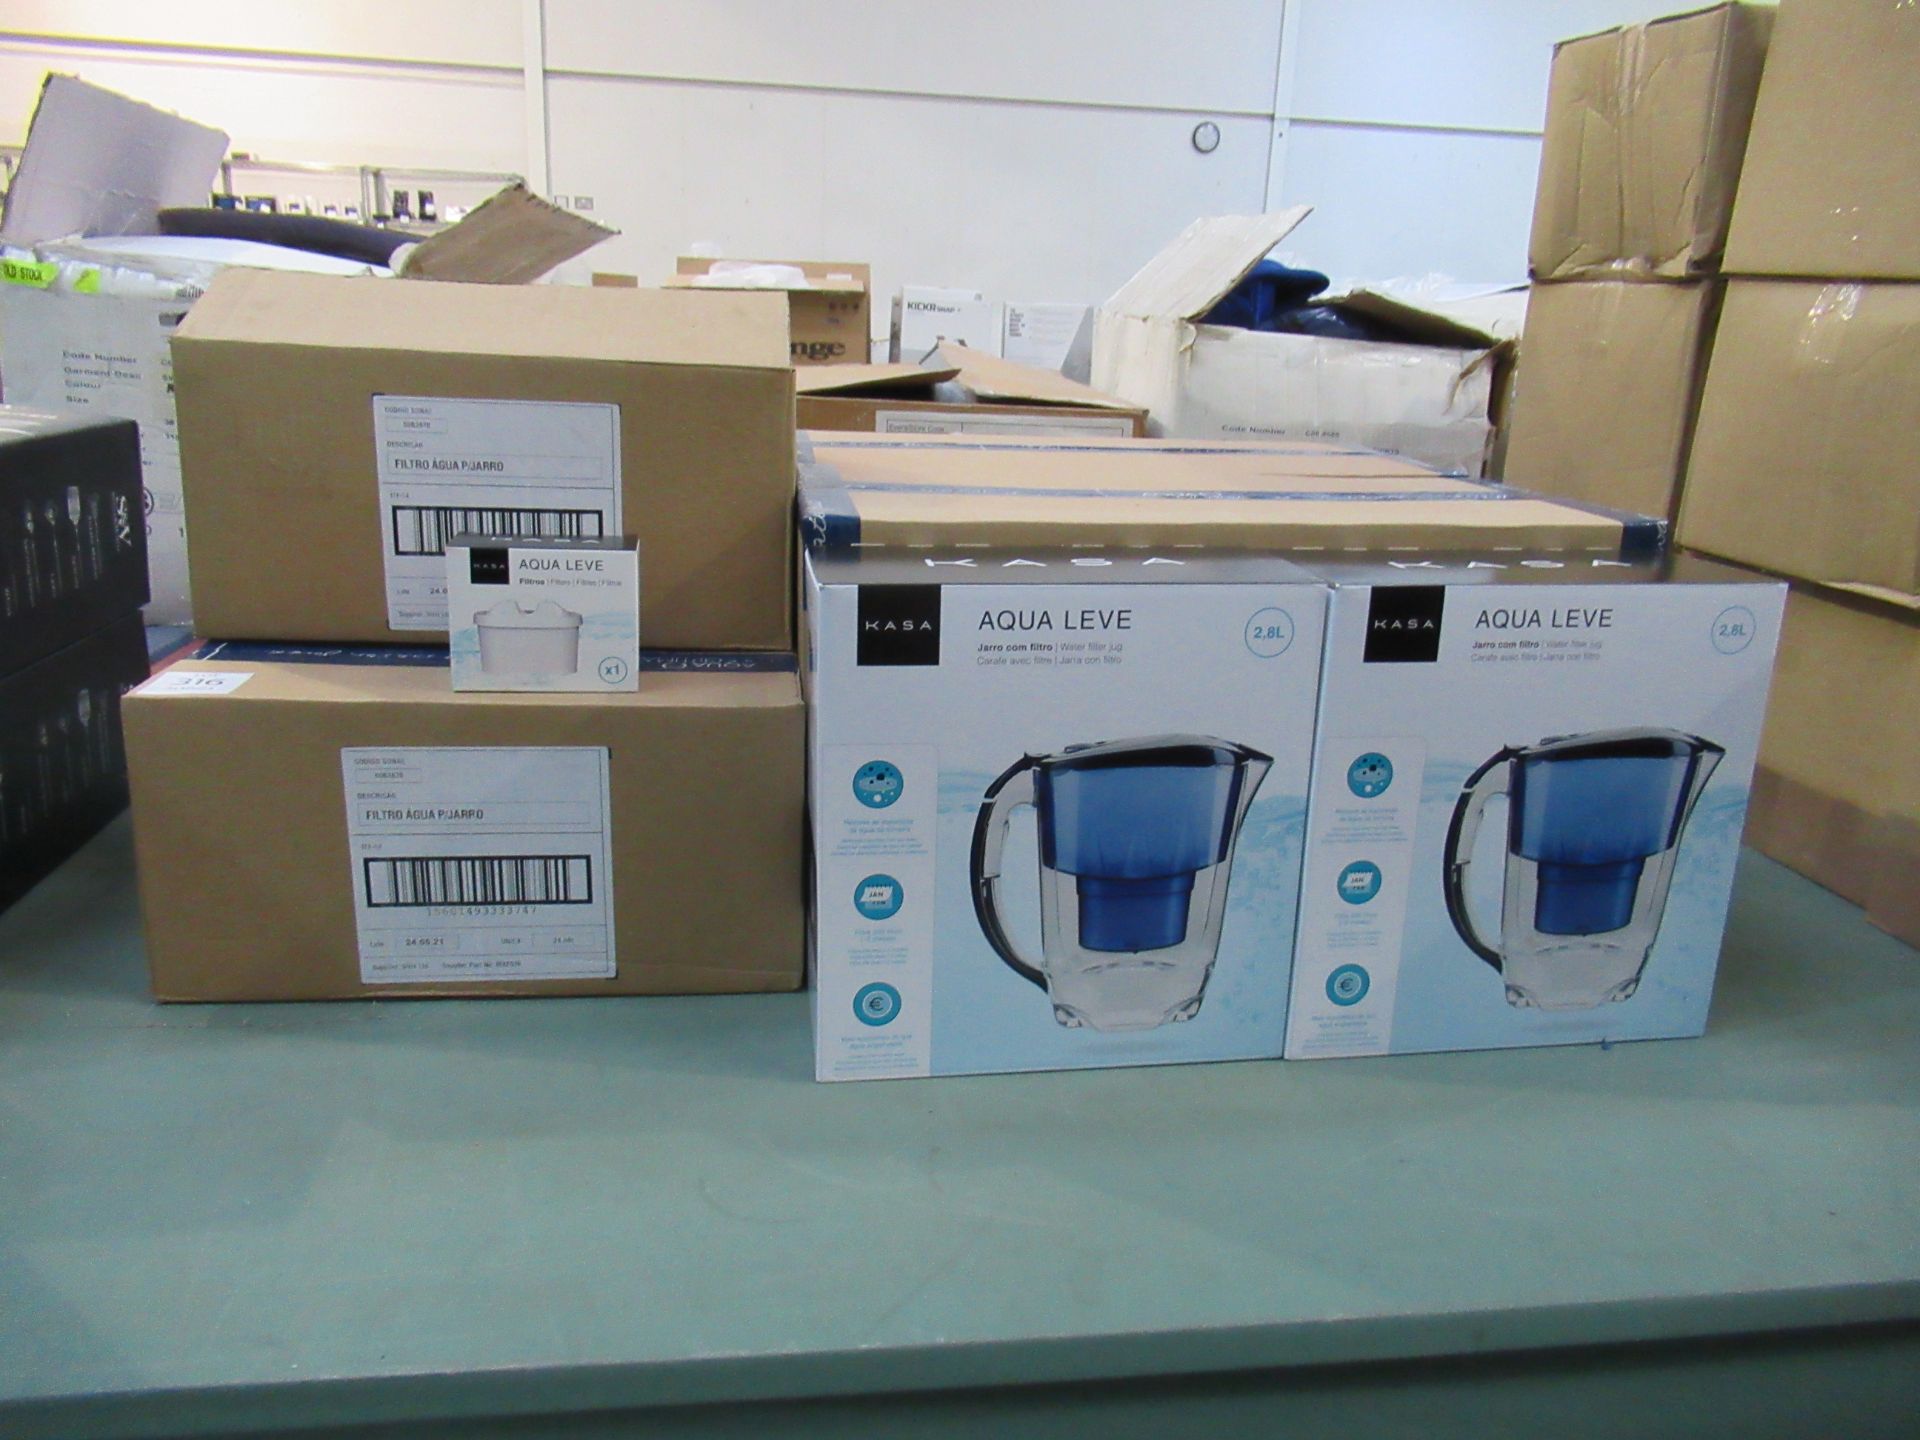 Kasa 2.8 Litre water filter jugs (10x boxed) and filters (60x boxed)